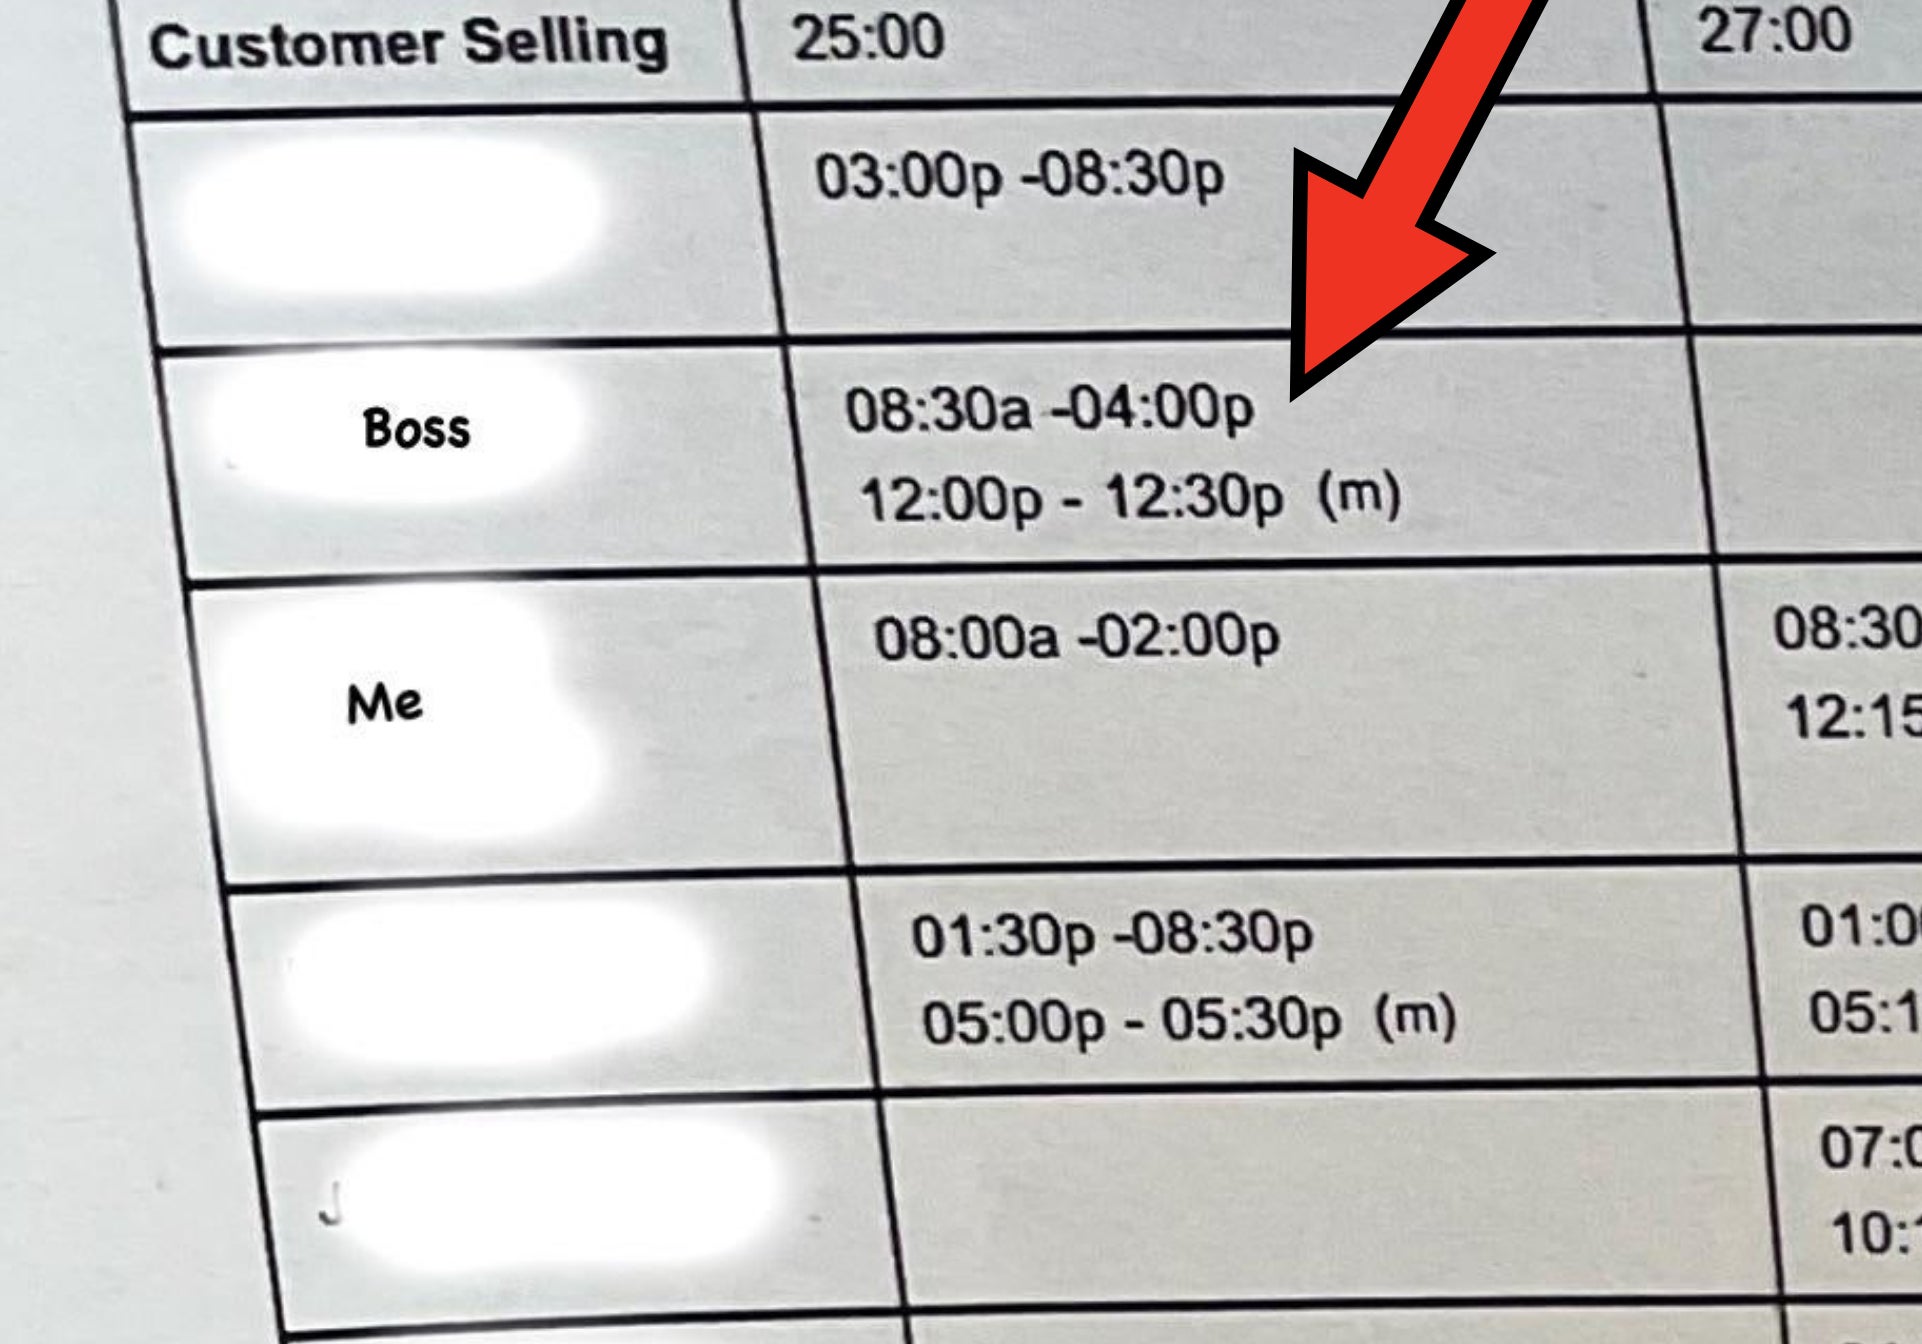 The schedule shows the employee is required to be there at 8 a.m. but the boss doesn&#x27;t arrive to unlock the store until 8:30